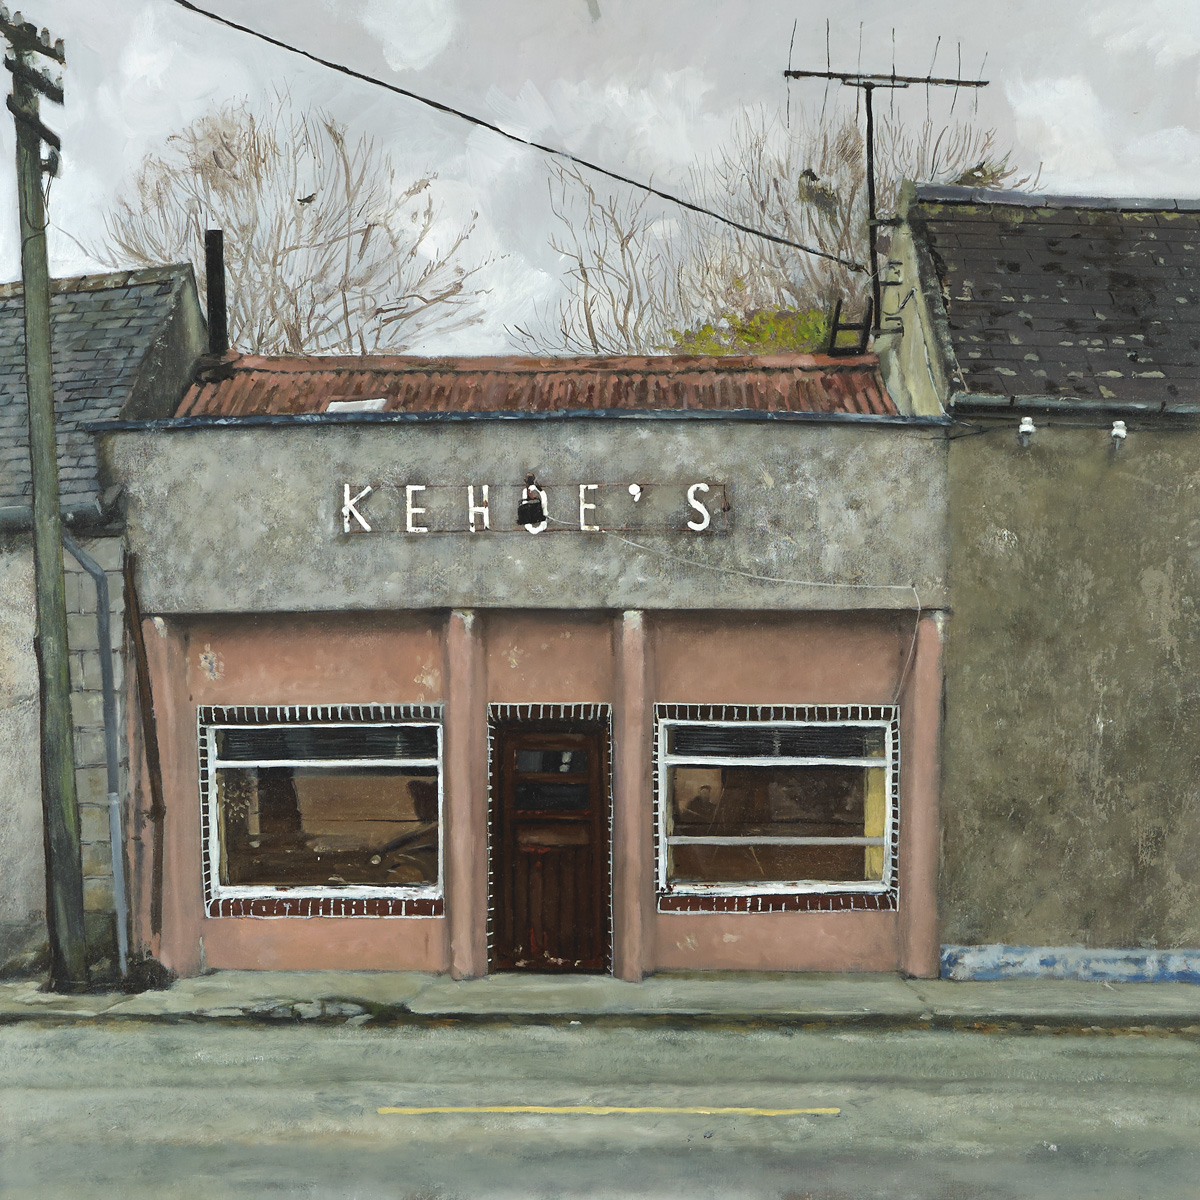 KEHOE'S, THE ROWER [COUNTY KILKENNY] 2001 by Blaise Smith sold for 1,700 at Whyte's Auctions